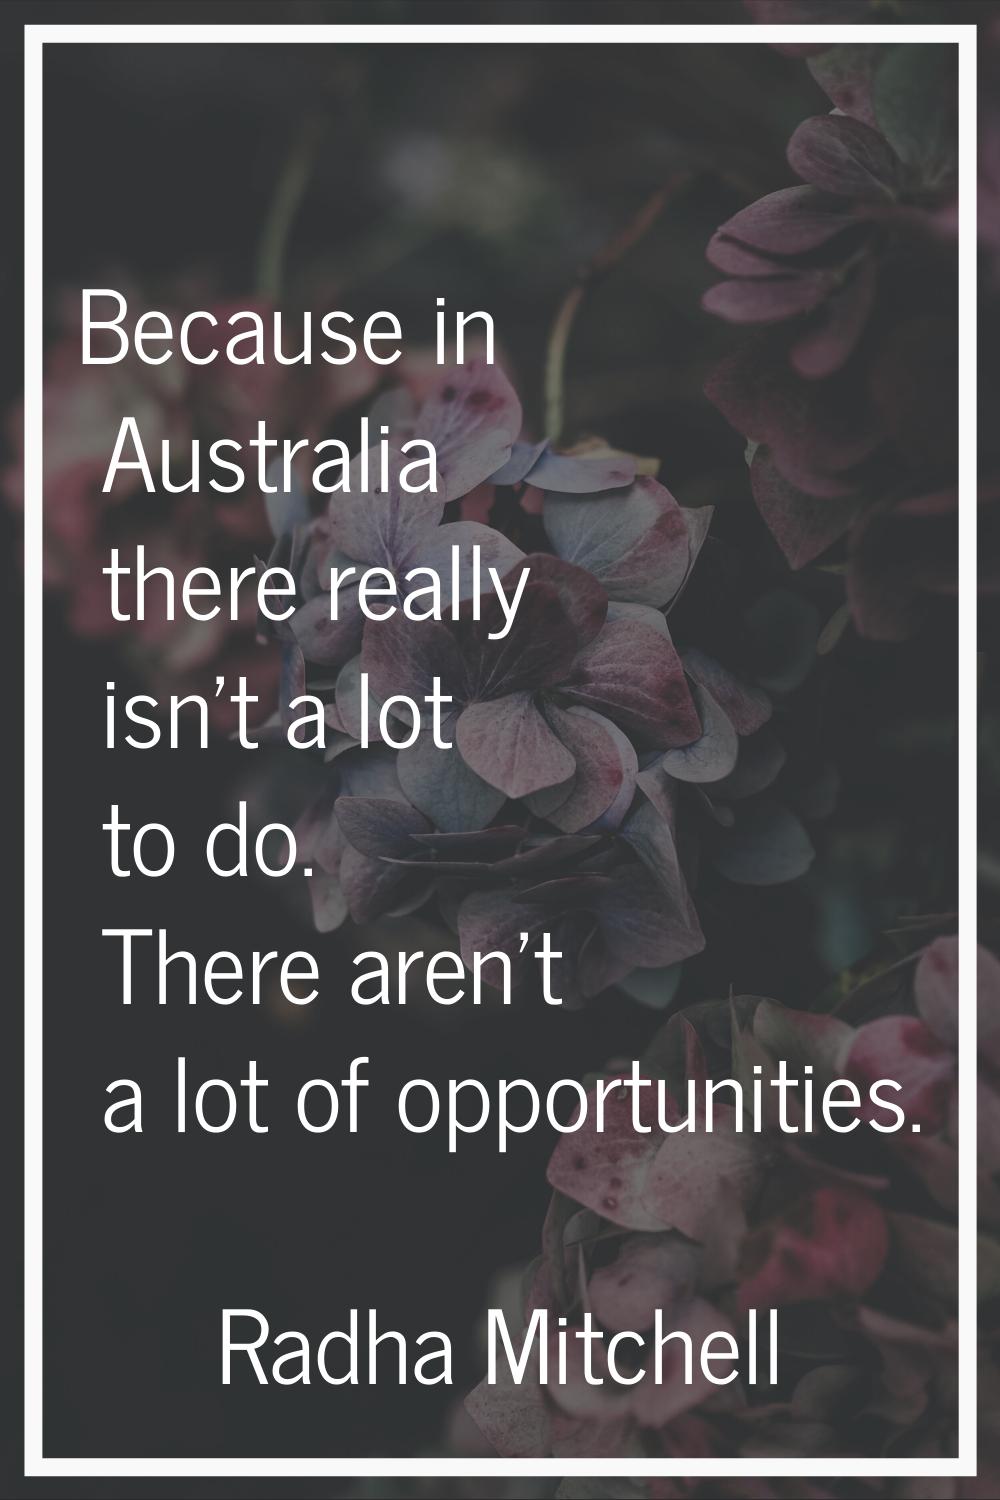 Because in Australia there really isn't a lot to do. There aren't a lot of opportunities.